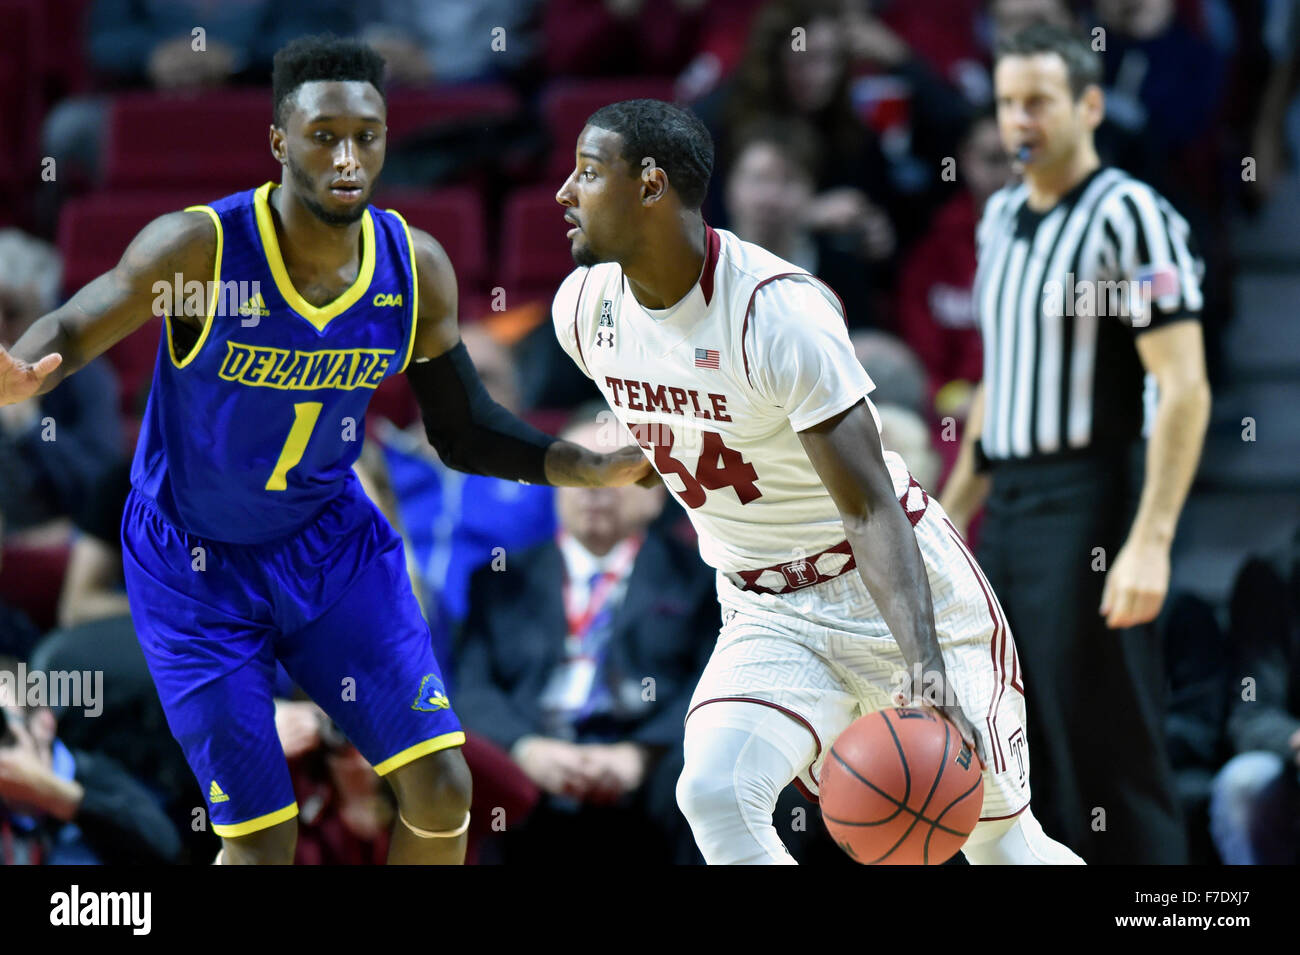 Philadelphia, Pennsylvania, USA. 29th Nov, 2015. Temple Owls guard DEVIN COLEMAN (34) dribbles the ball as Delaware Fightin Blue Hens guard KORY HOLDEN (1) defends during the NCAA basketball game played at the Liacouras Center in Philadelphia. Temple beat Delaware 69-50. © Ken Inness/ZUMA Wire/Alamy Live News Stock Photo